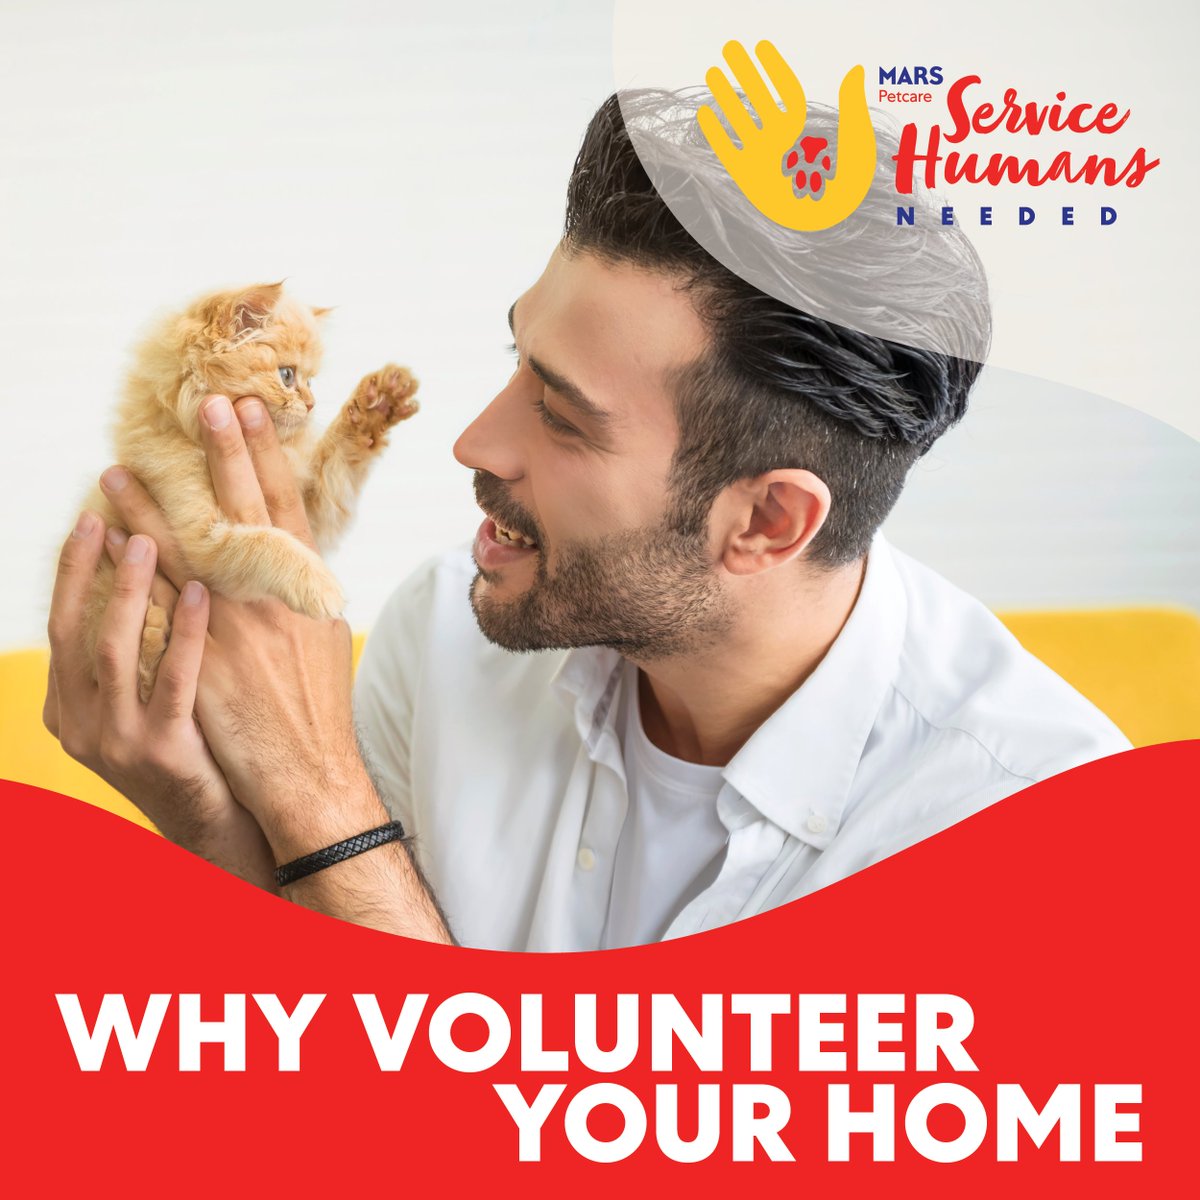 Pets are spending more and more time in shelters, causing resource constraints for the shelters and stress for the pets. When you foster a pet, you help reduce shelter overcrowding and give a cat or dog a loving home as they wait to be adopted. ❤️ #ServiceHumansNeeded